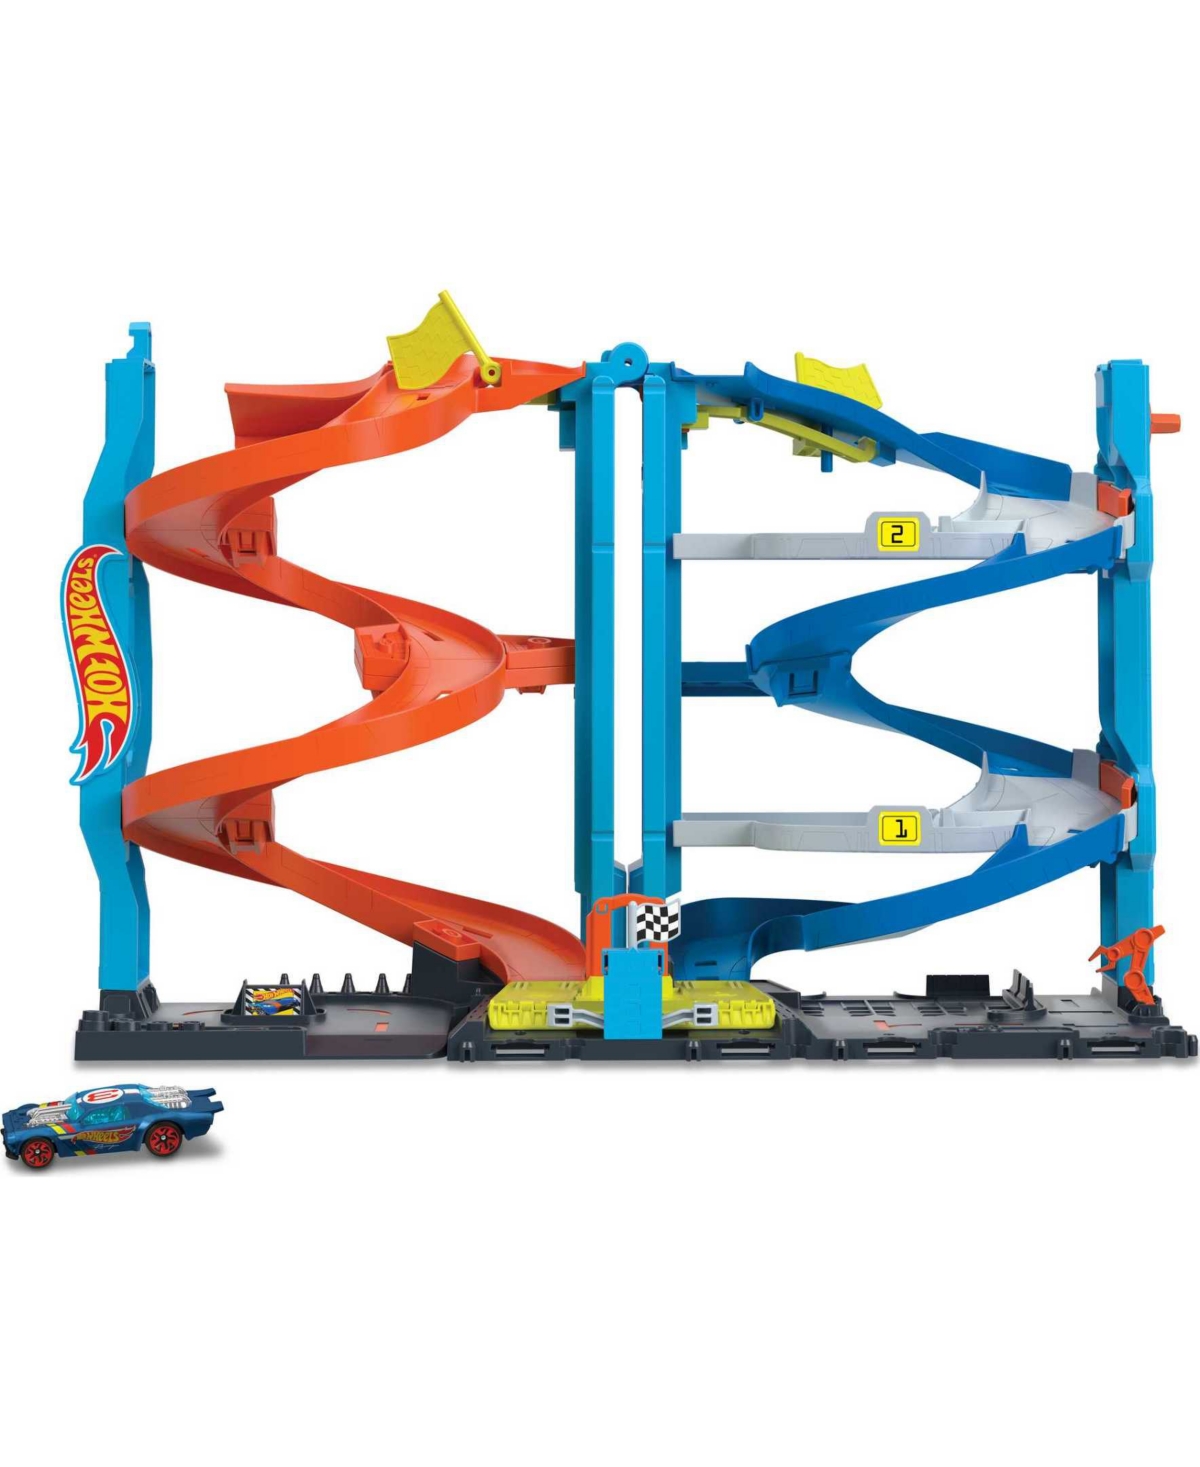 Hot Wheels Kids' City Transforming Race Tower Playset In Multi-color